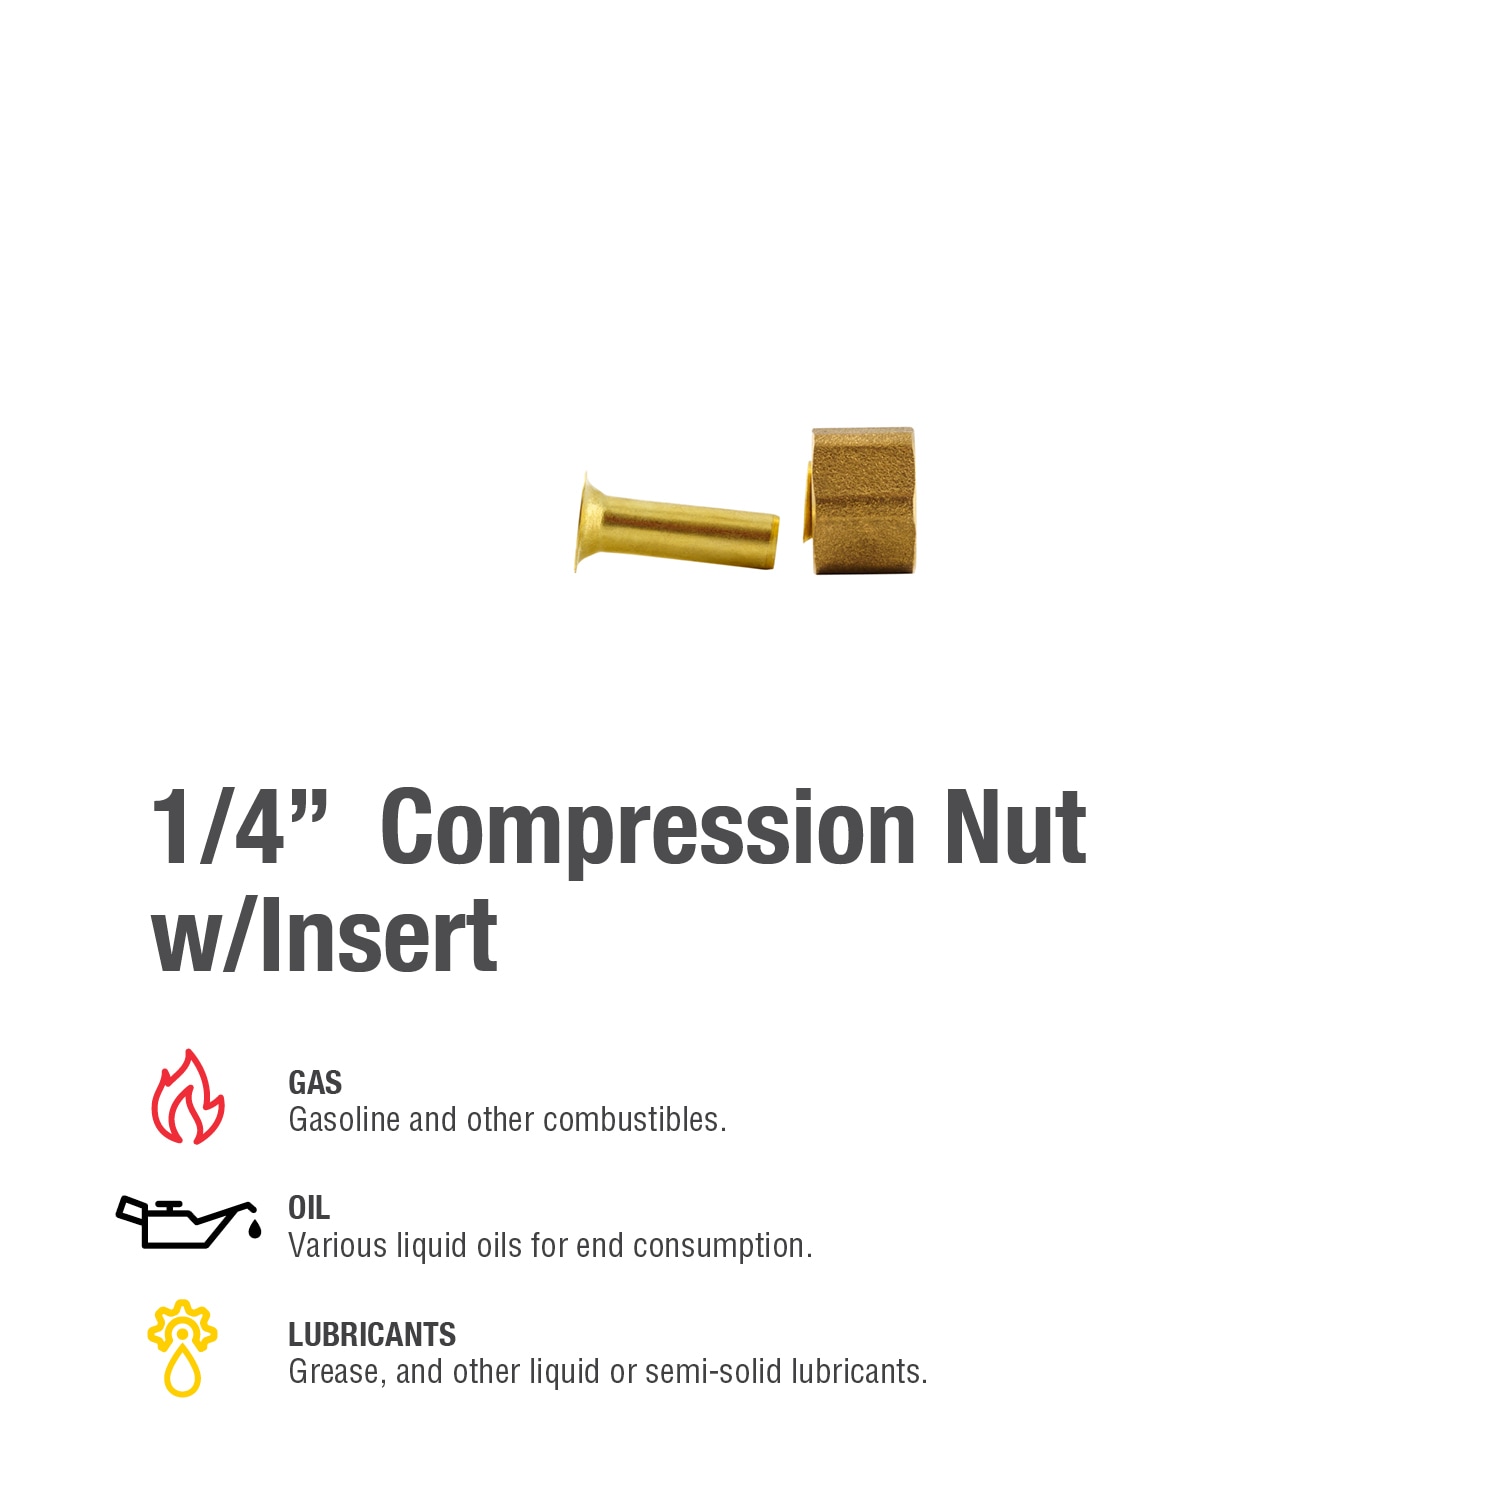 Proline Series 1/4-in Compression Nut Fitting in the Brass